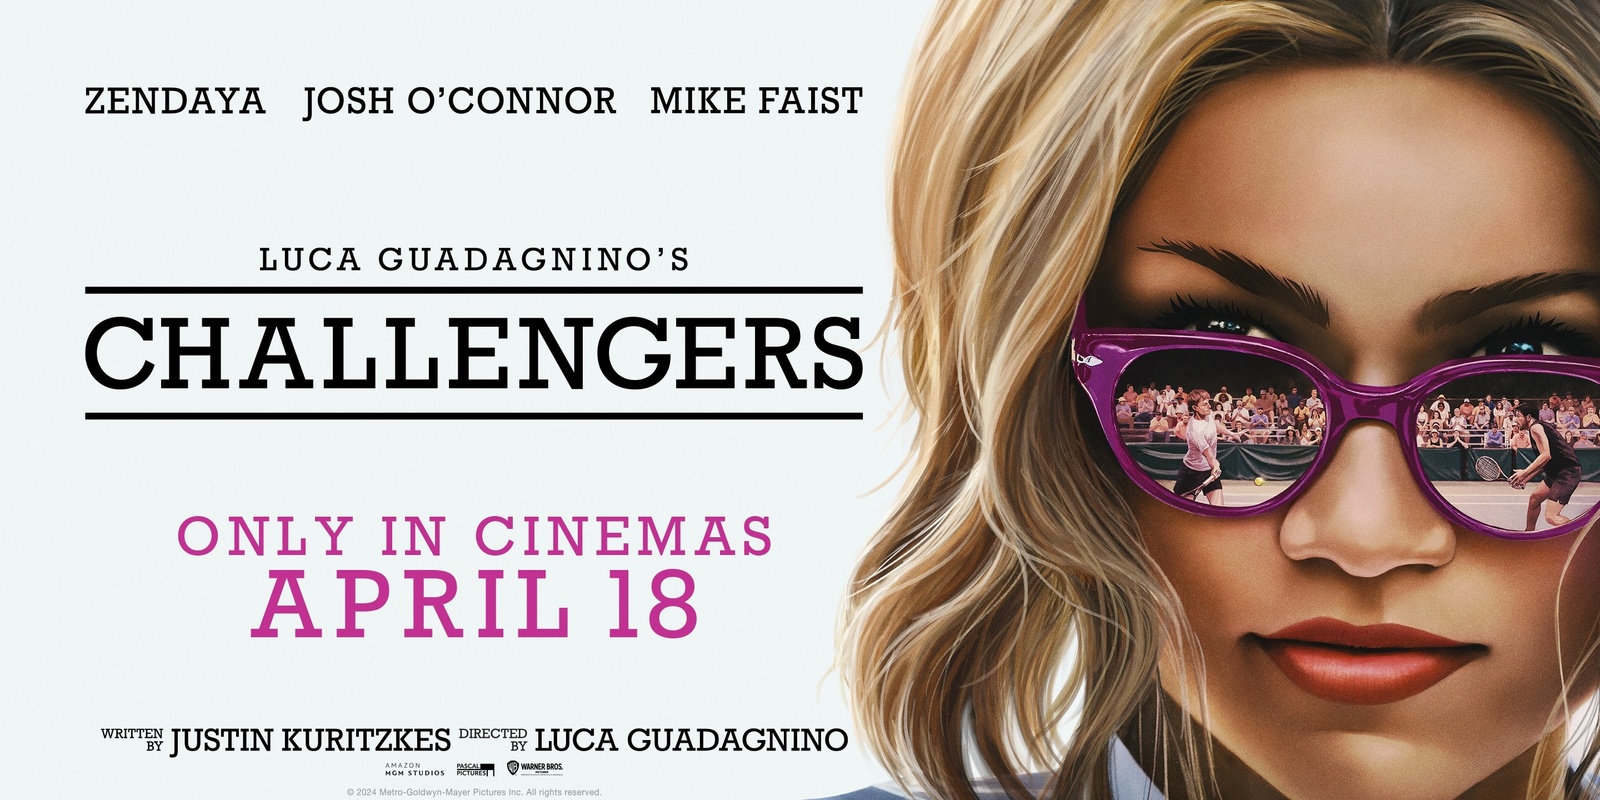 Banner image for Challengers [M]